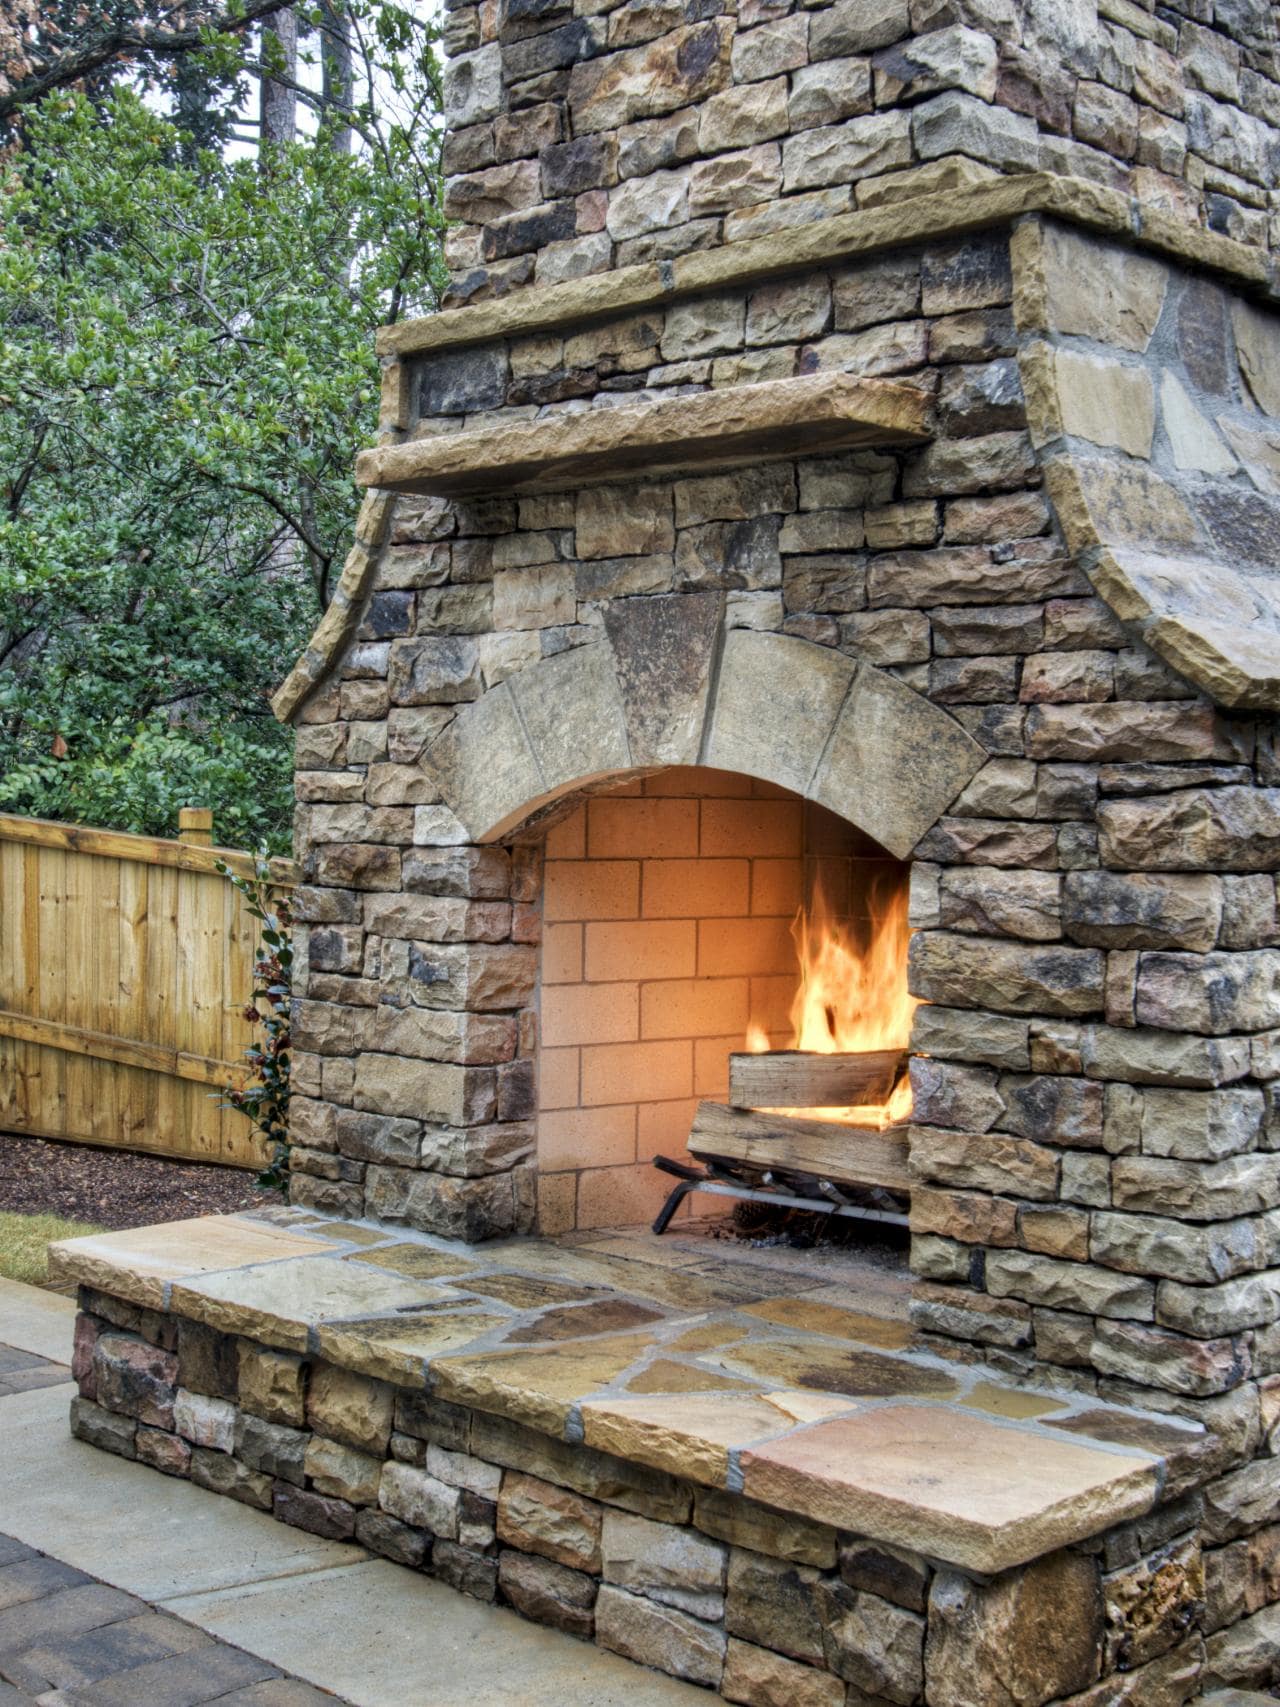 How To Choose An Outdoor Fireplace?